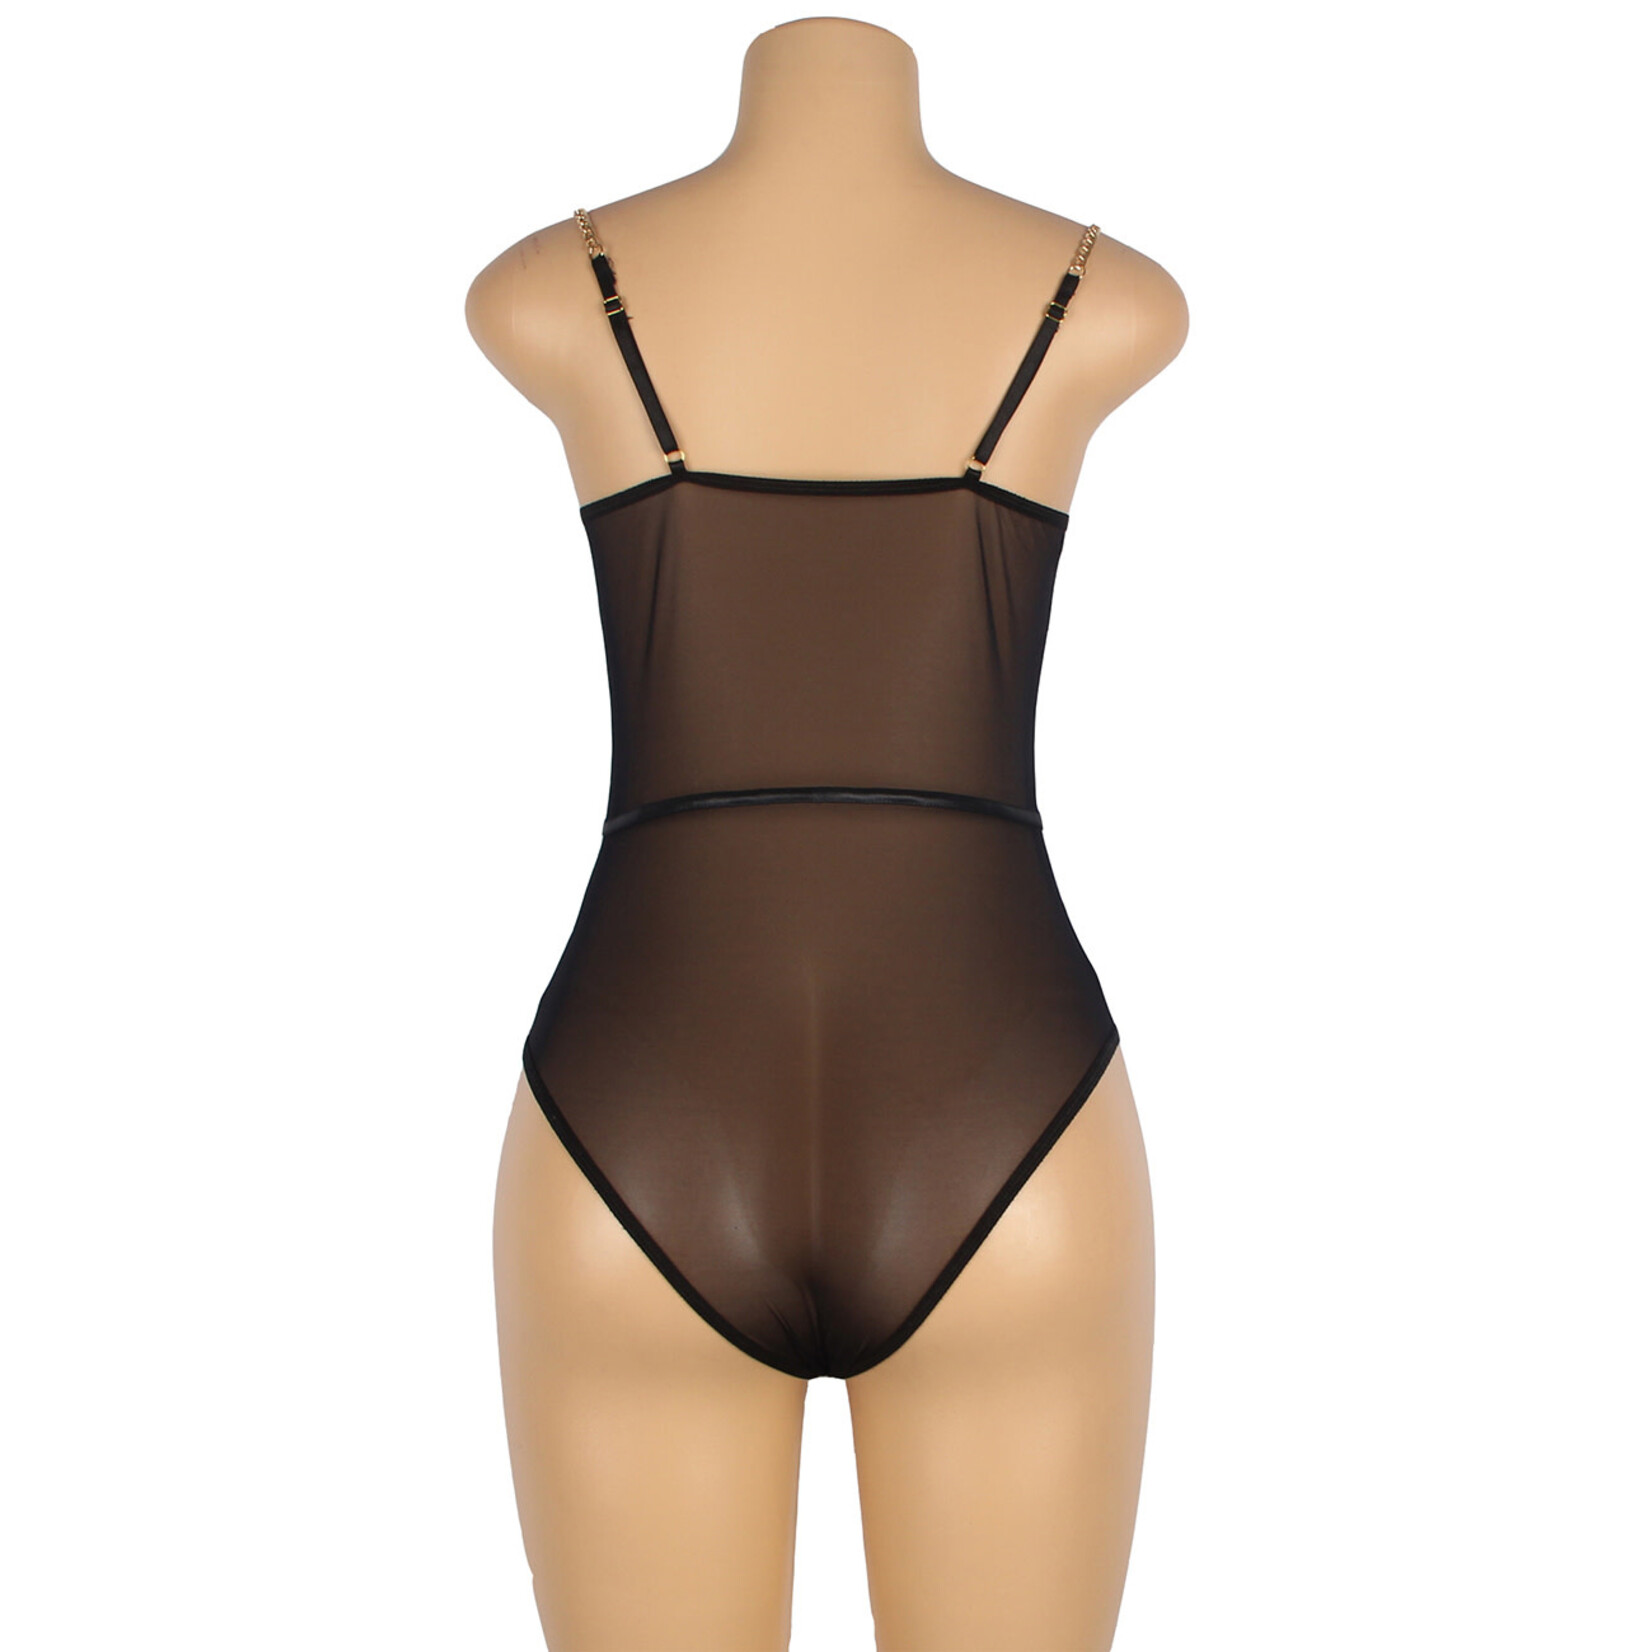 OH YEAH! -  ONE PIECE METAL STRAP SEE THROUGH UNDERWIRE BODYSUIT XS-S